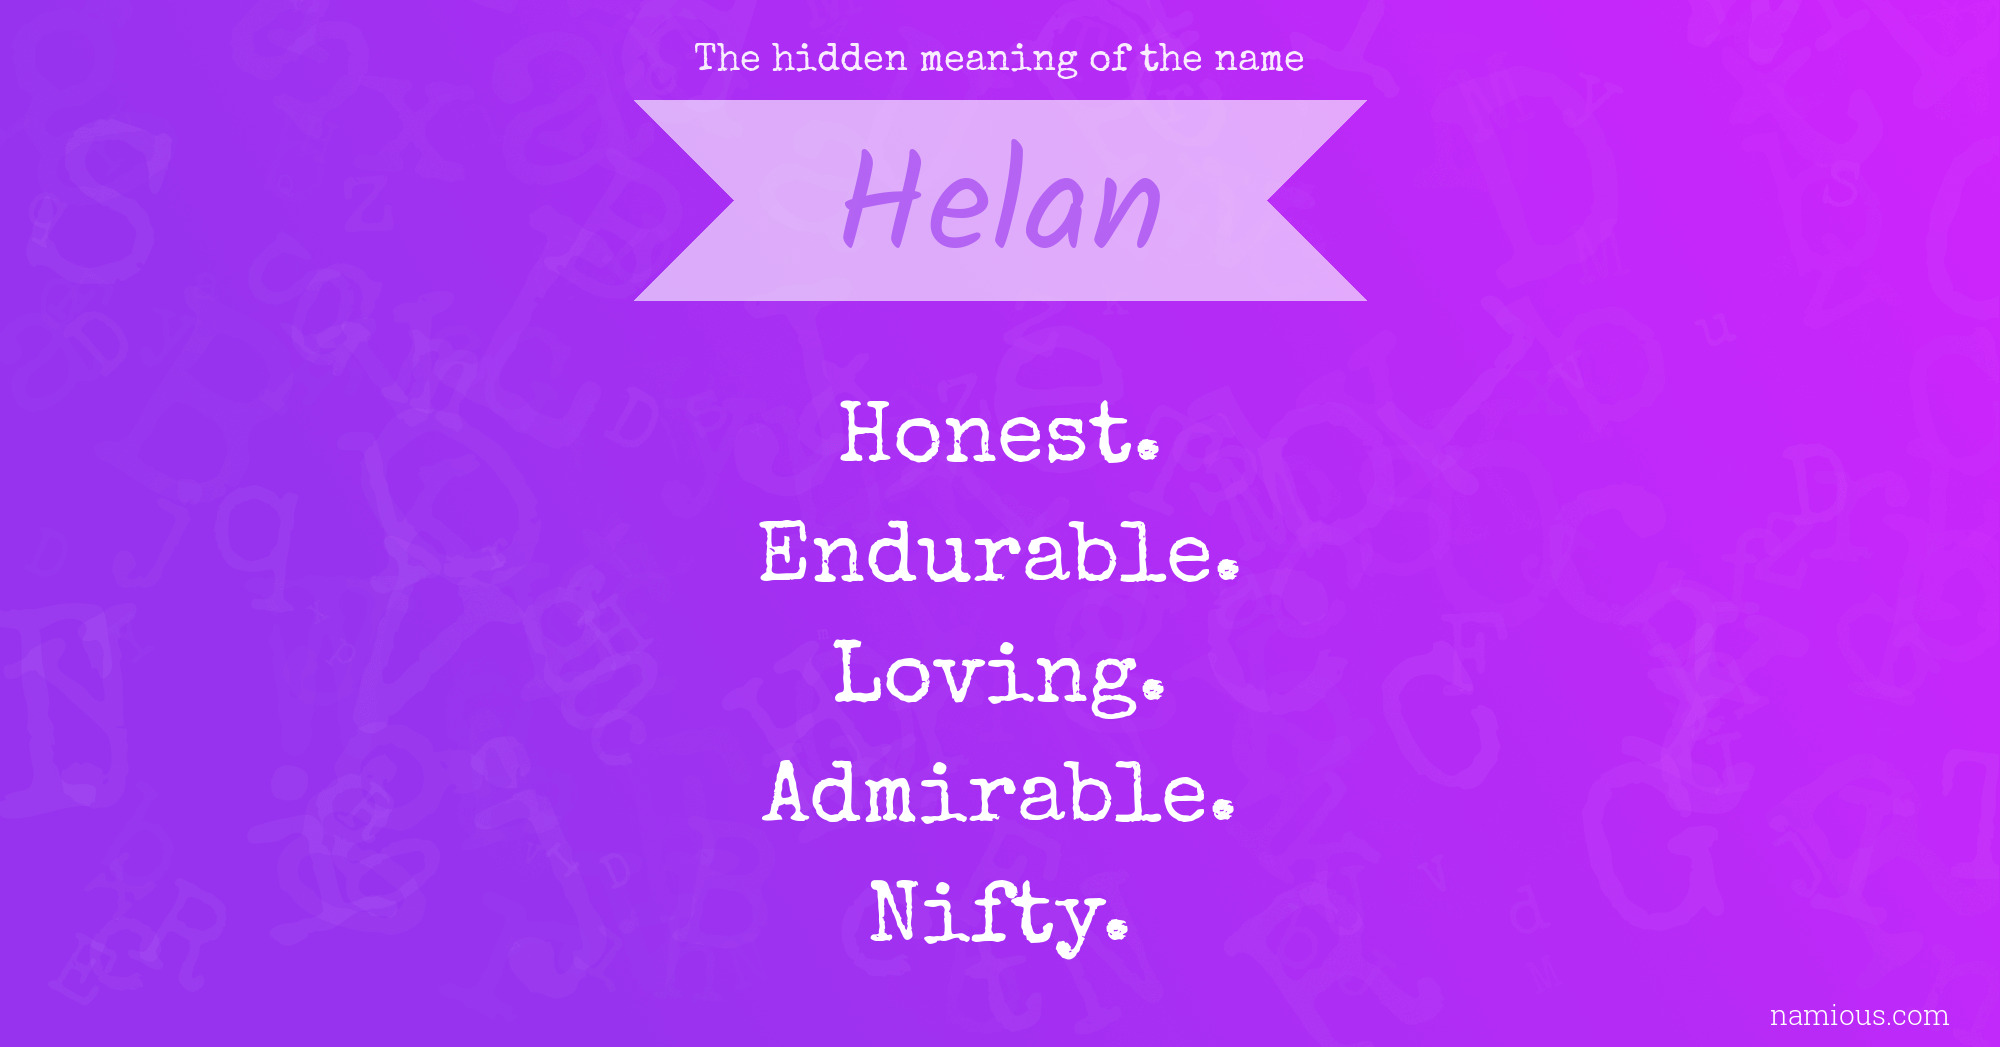 The hidden meaning of the name Helan